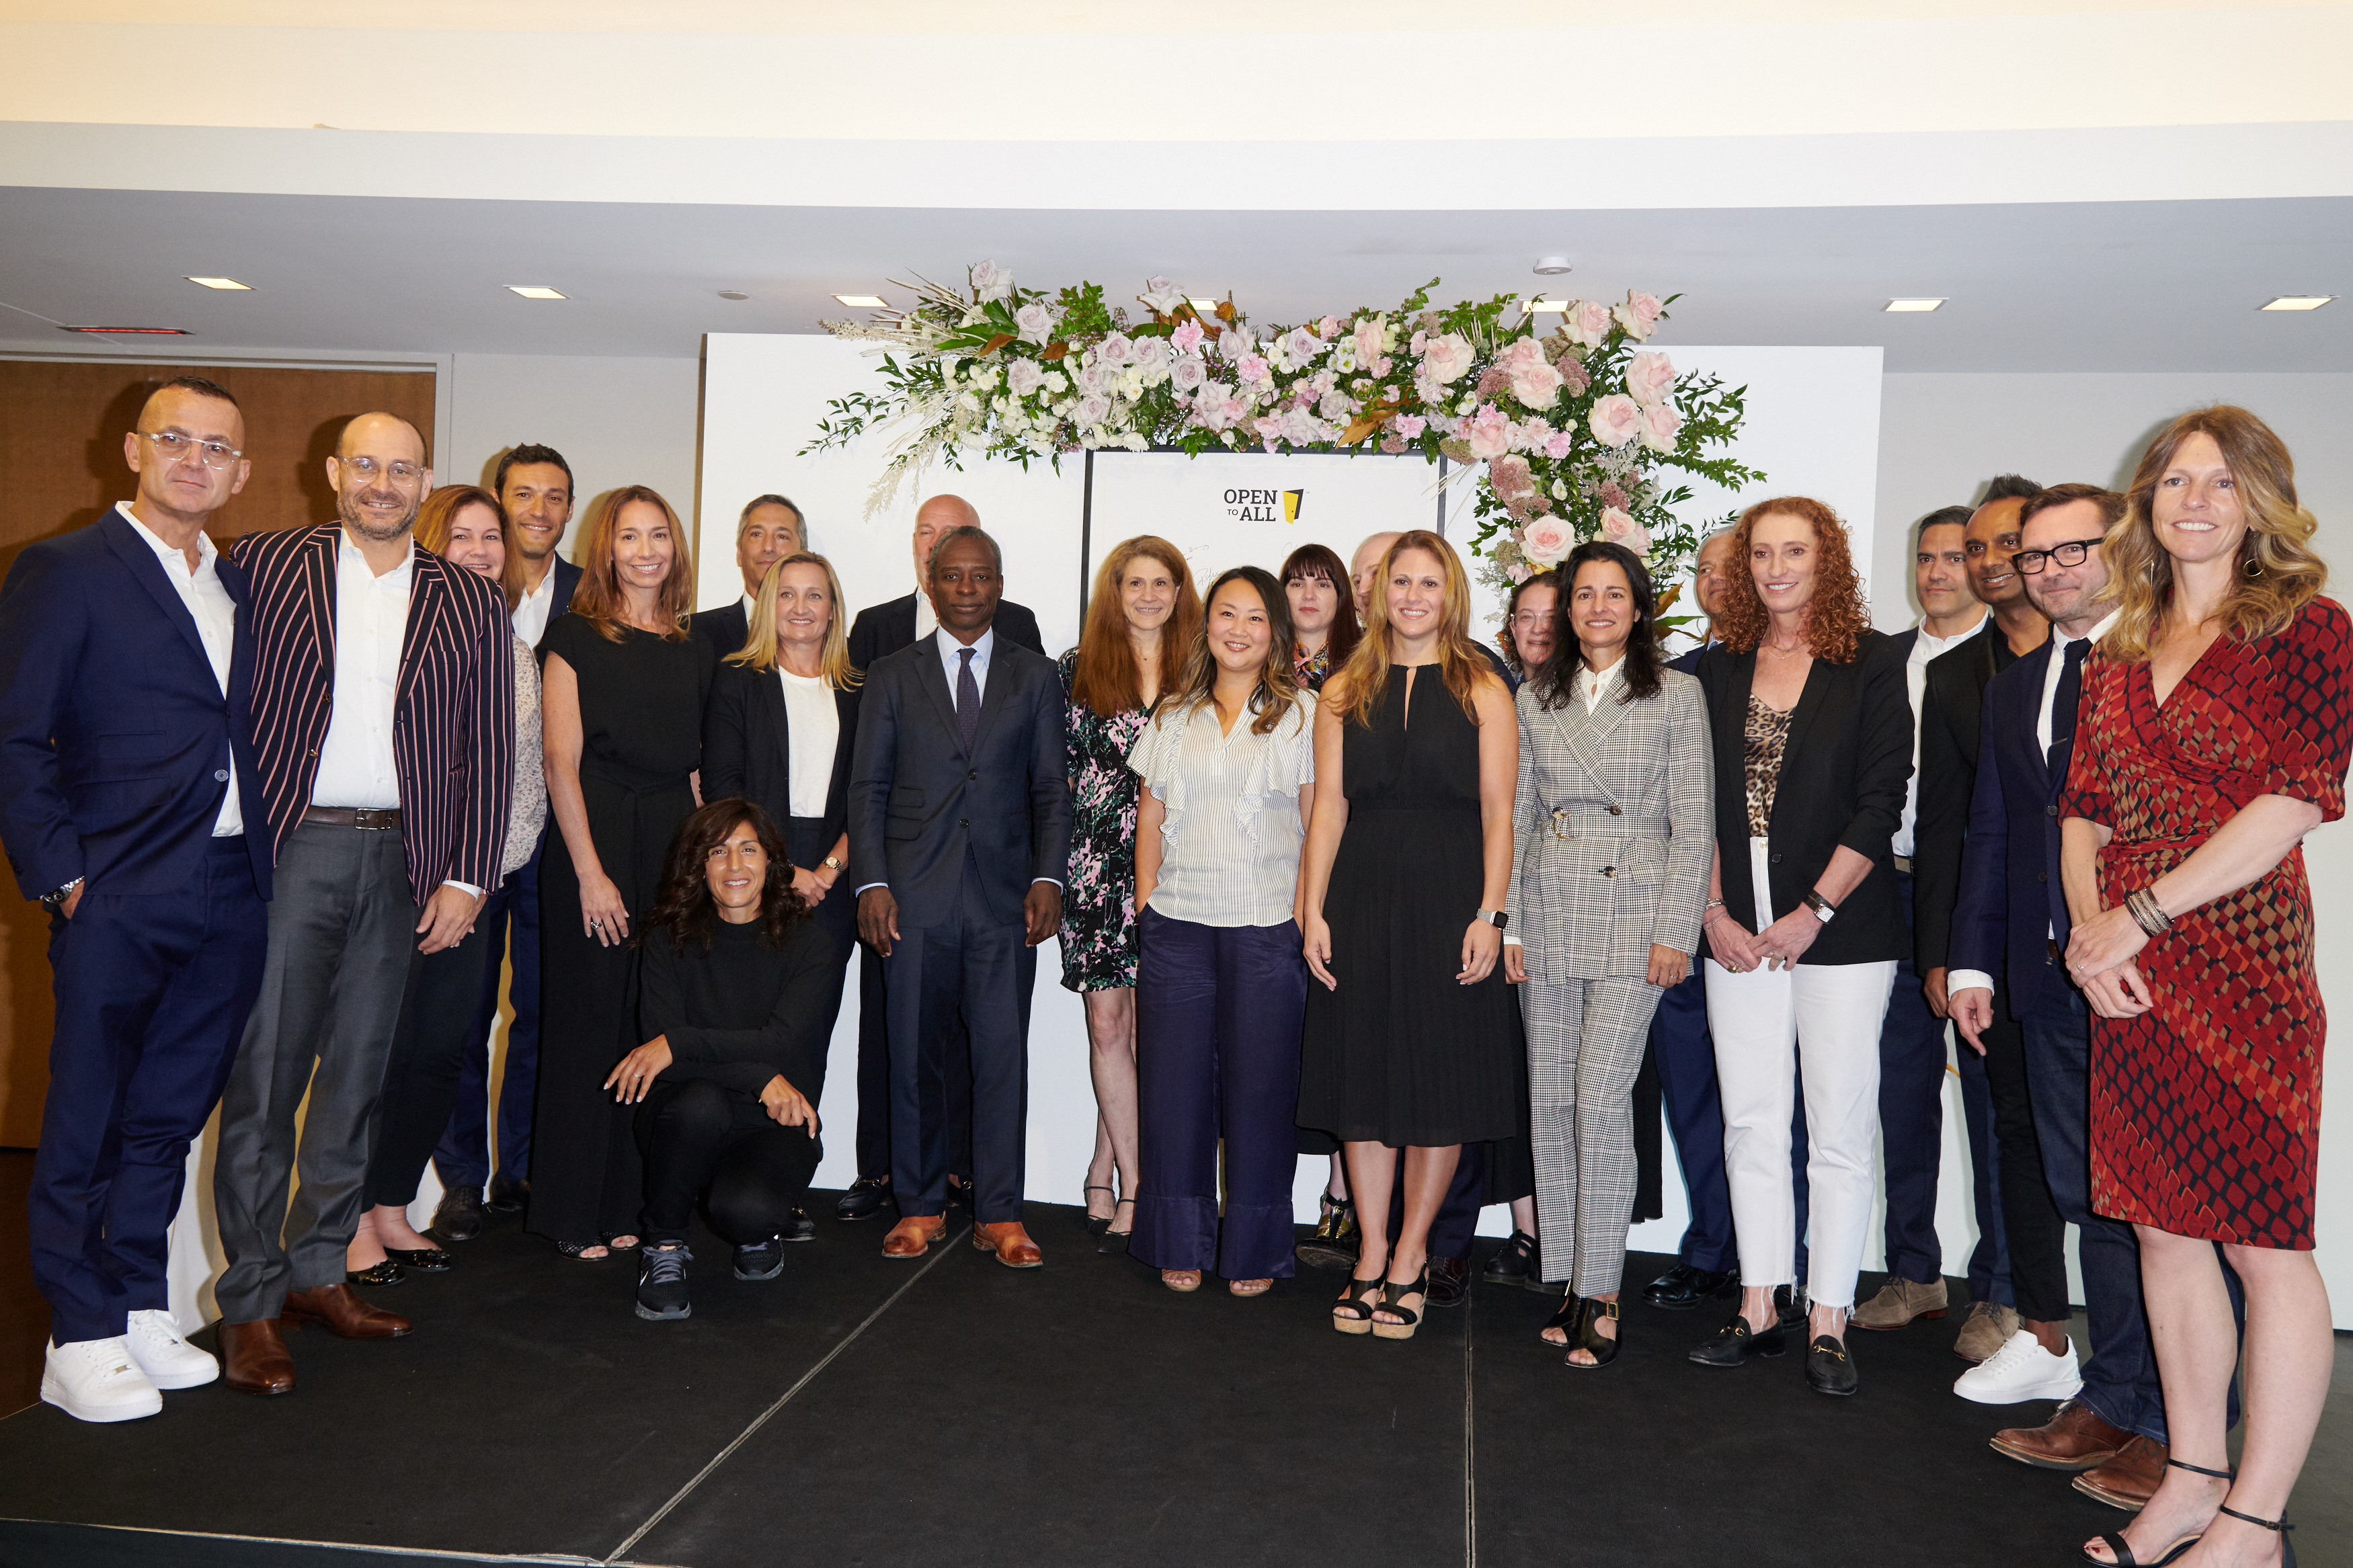 Tapestry and Its Brands - Coach, Kate Spade and Stuart Weitzman - Bring the  Fashion Industry Together to Sign Open to All Pledge